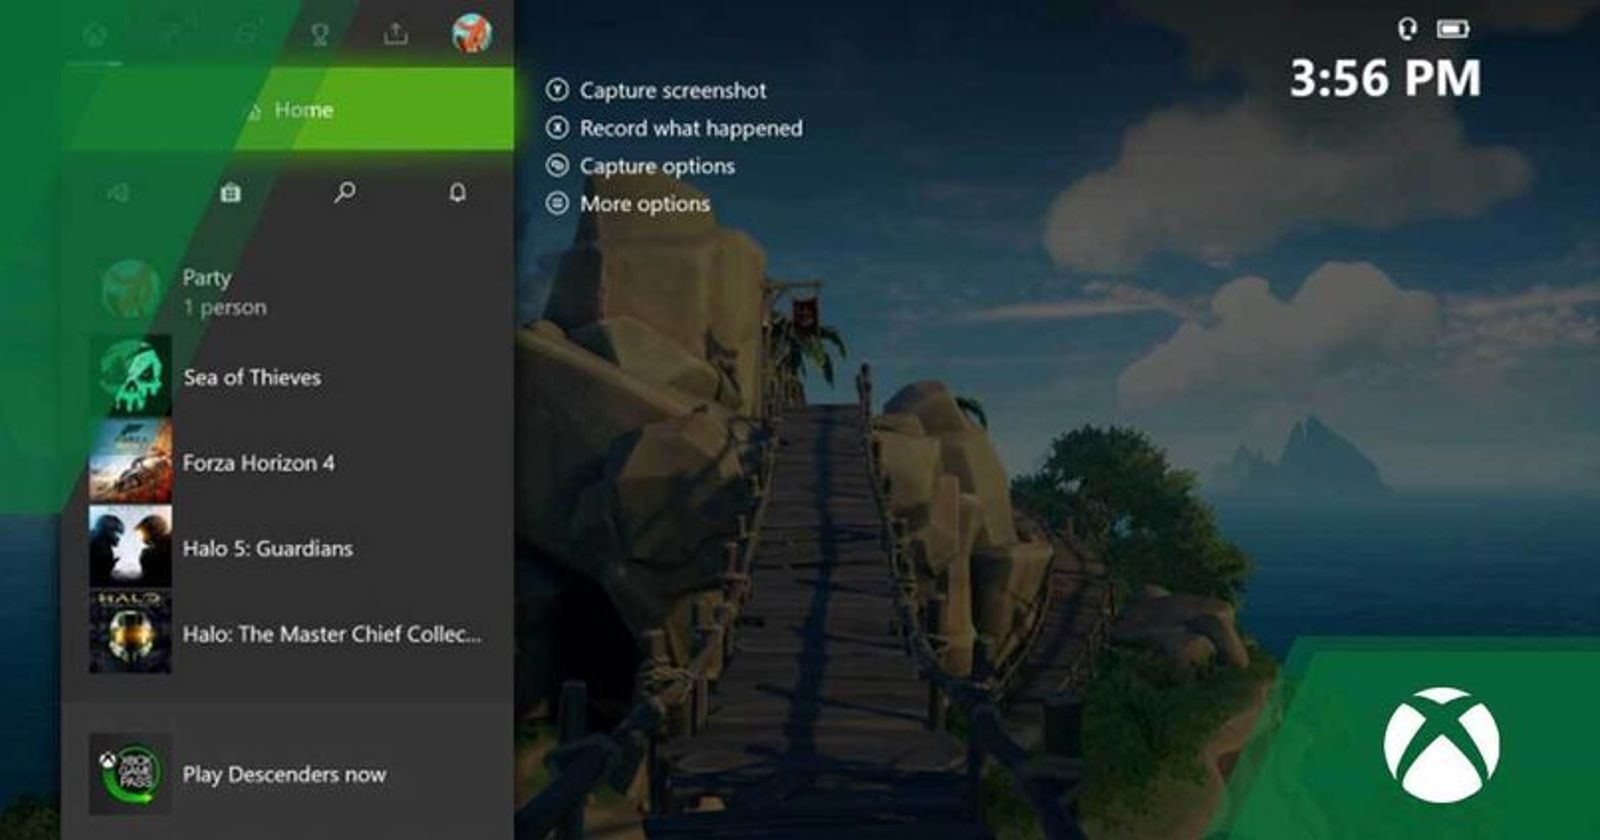 Express Yourself with New Gamertag Features - Xbox Wire